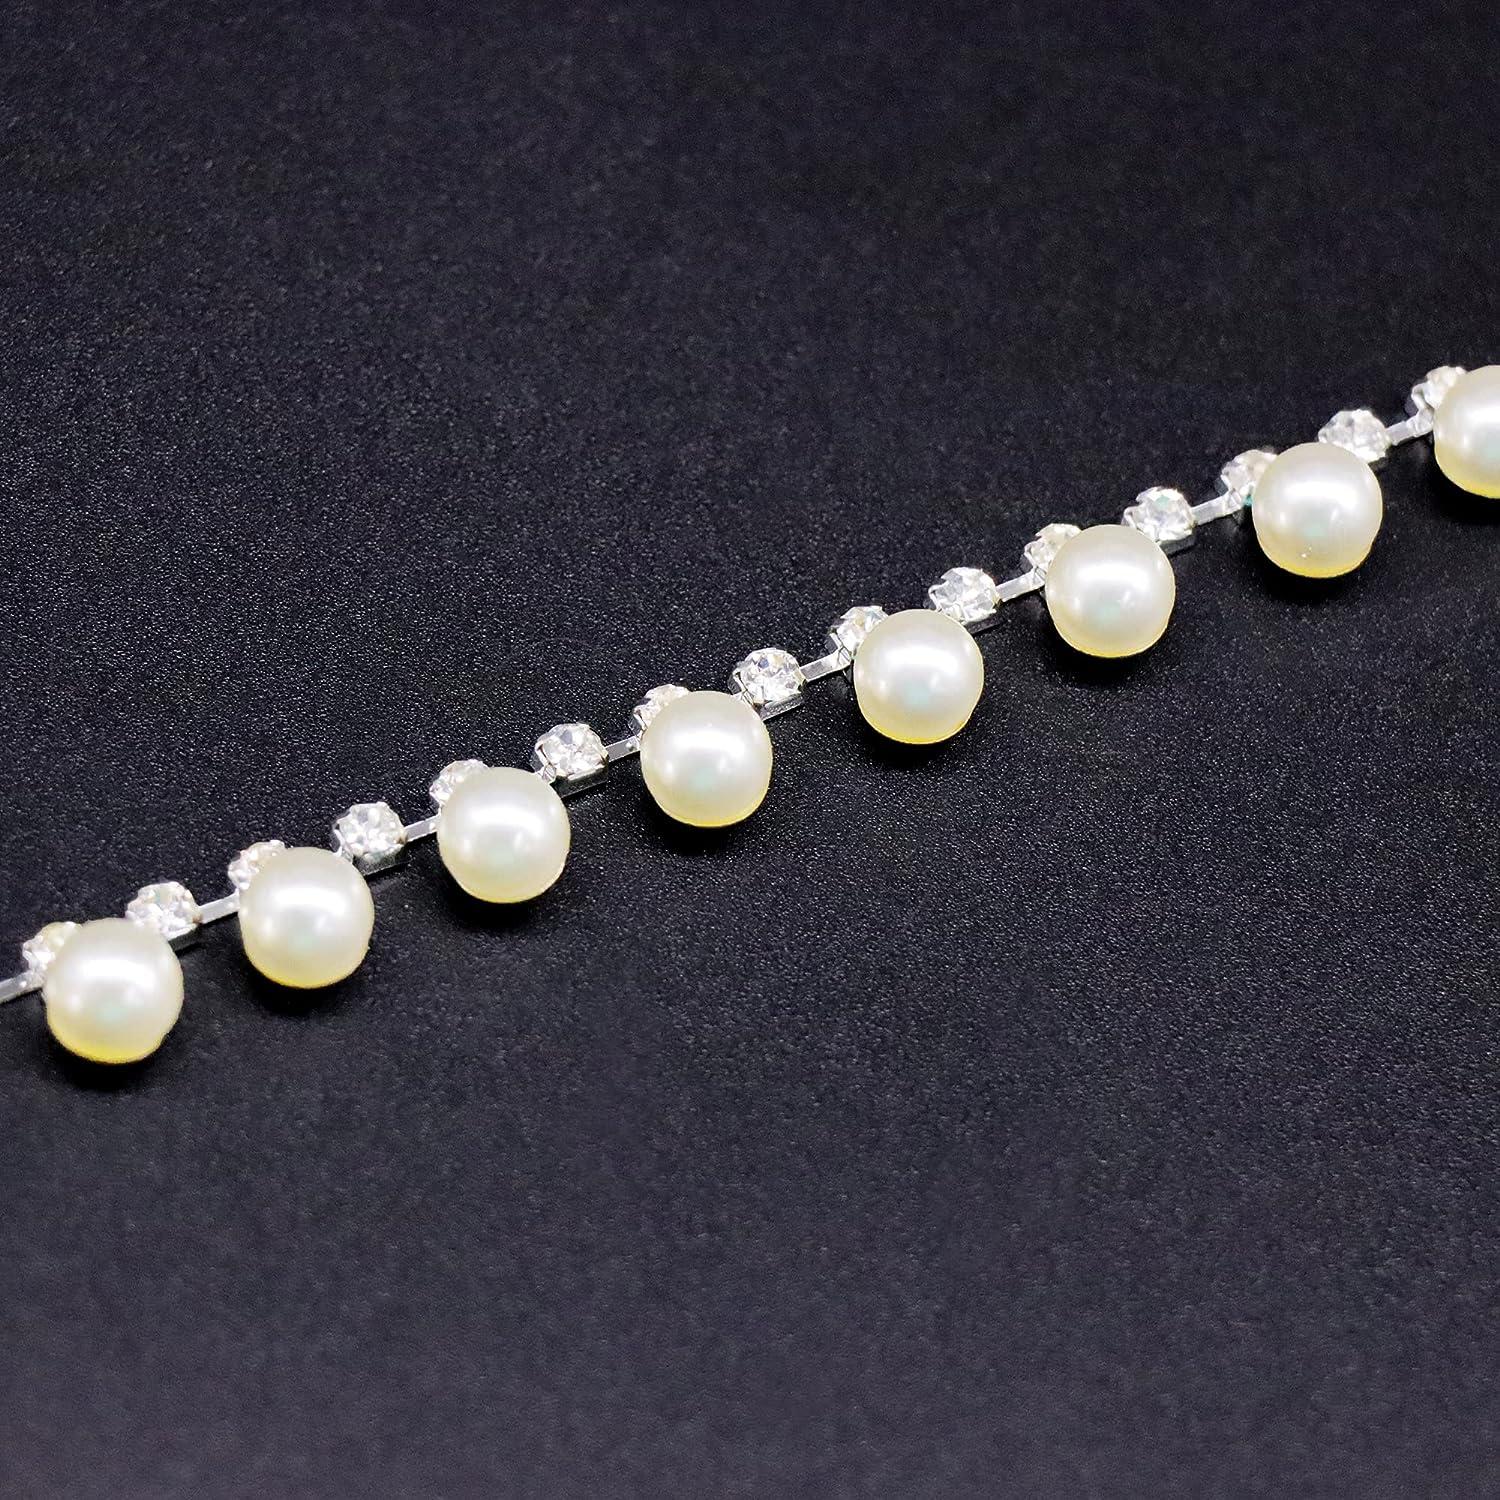 Decorative Pearl Ribbon for Clothing DIY Pearl Design Clothes Trim